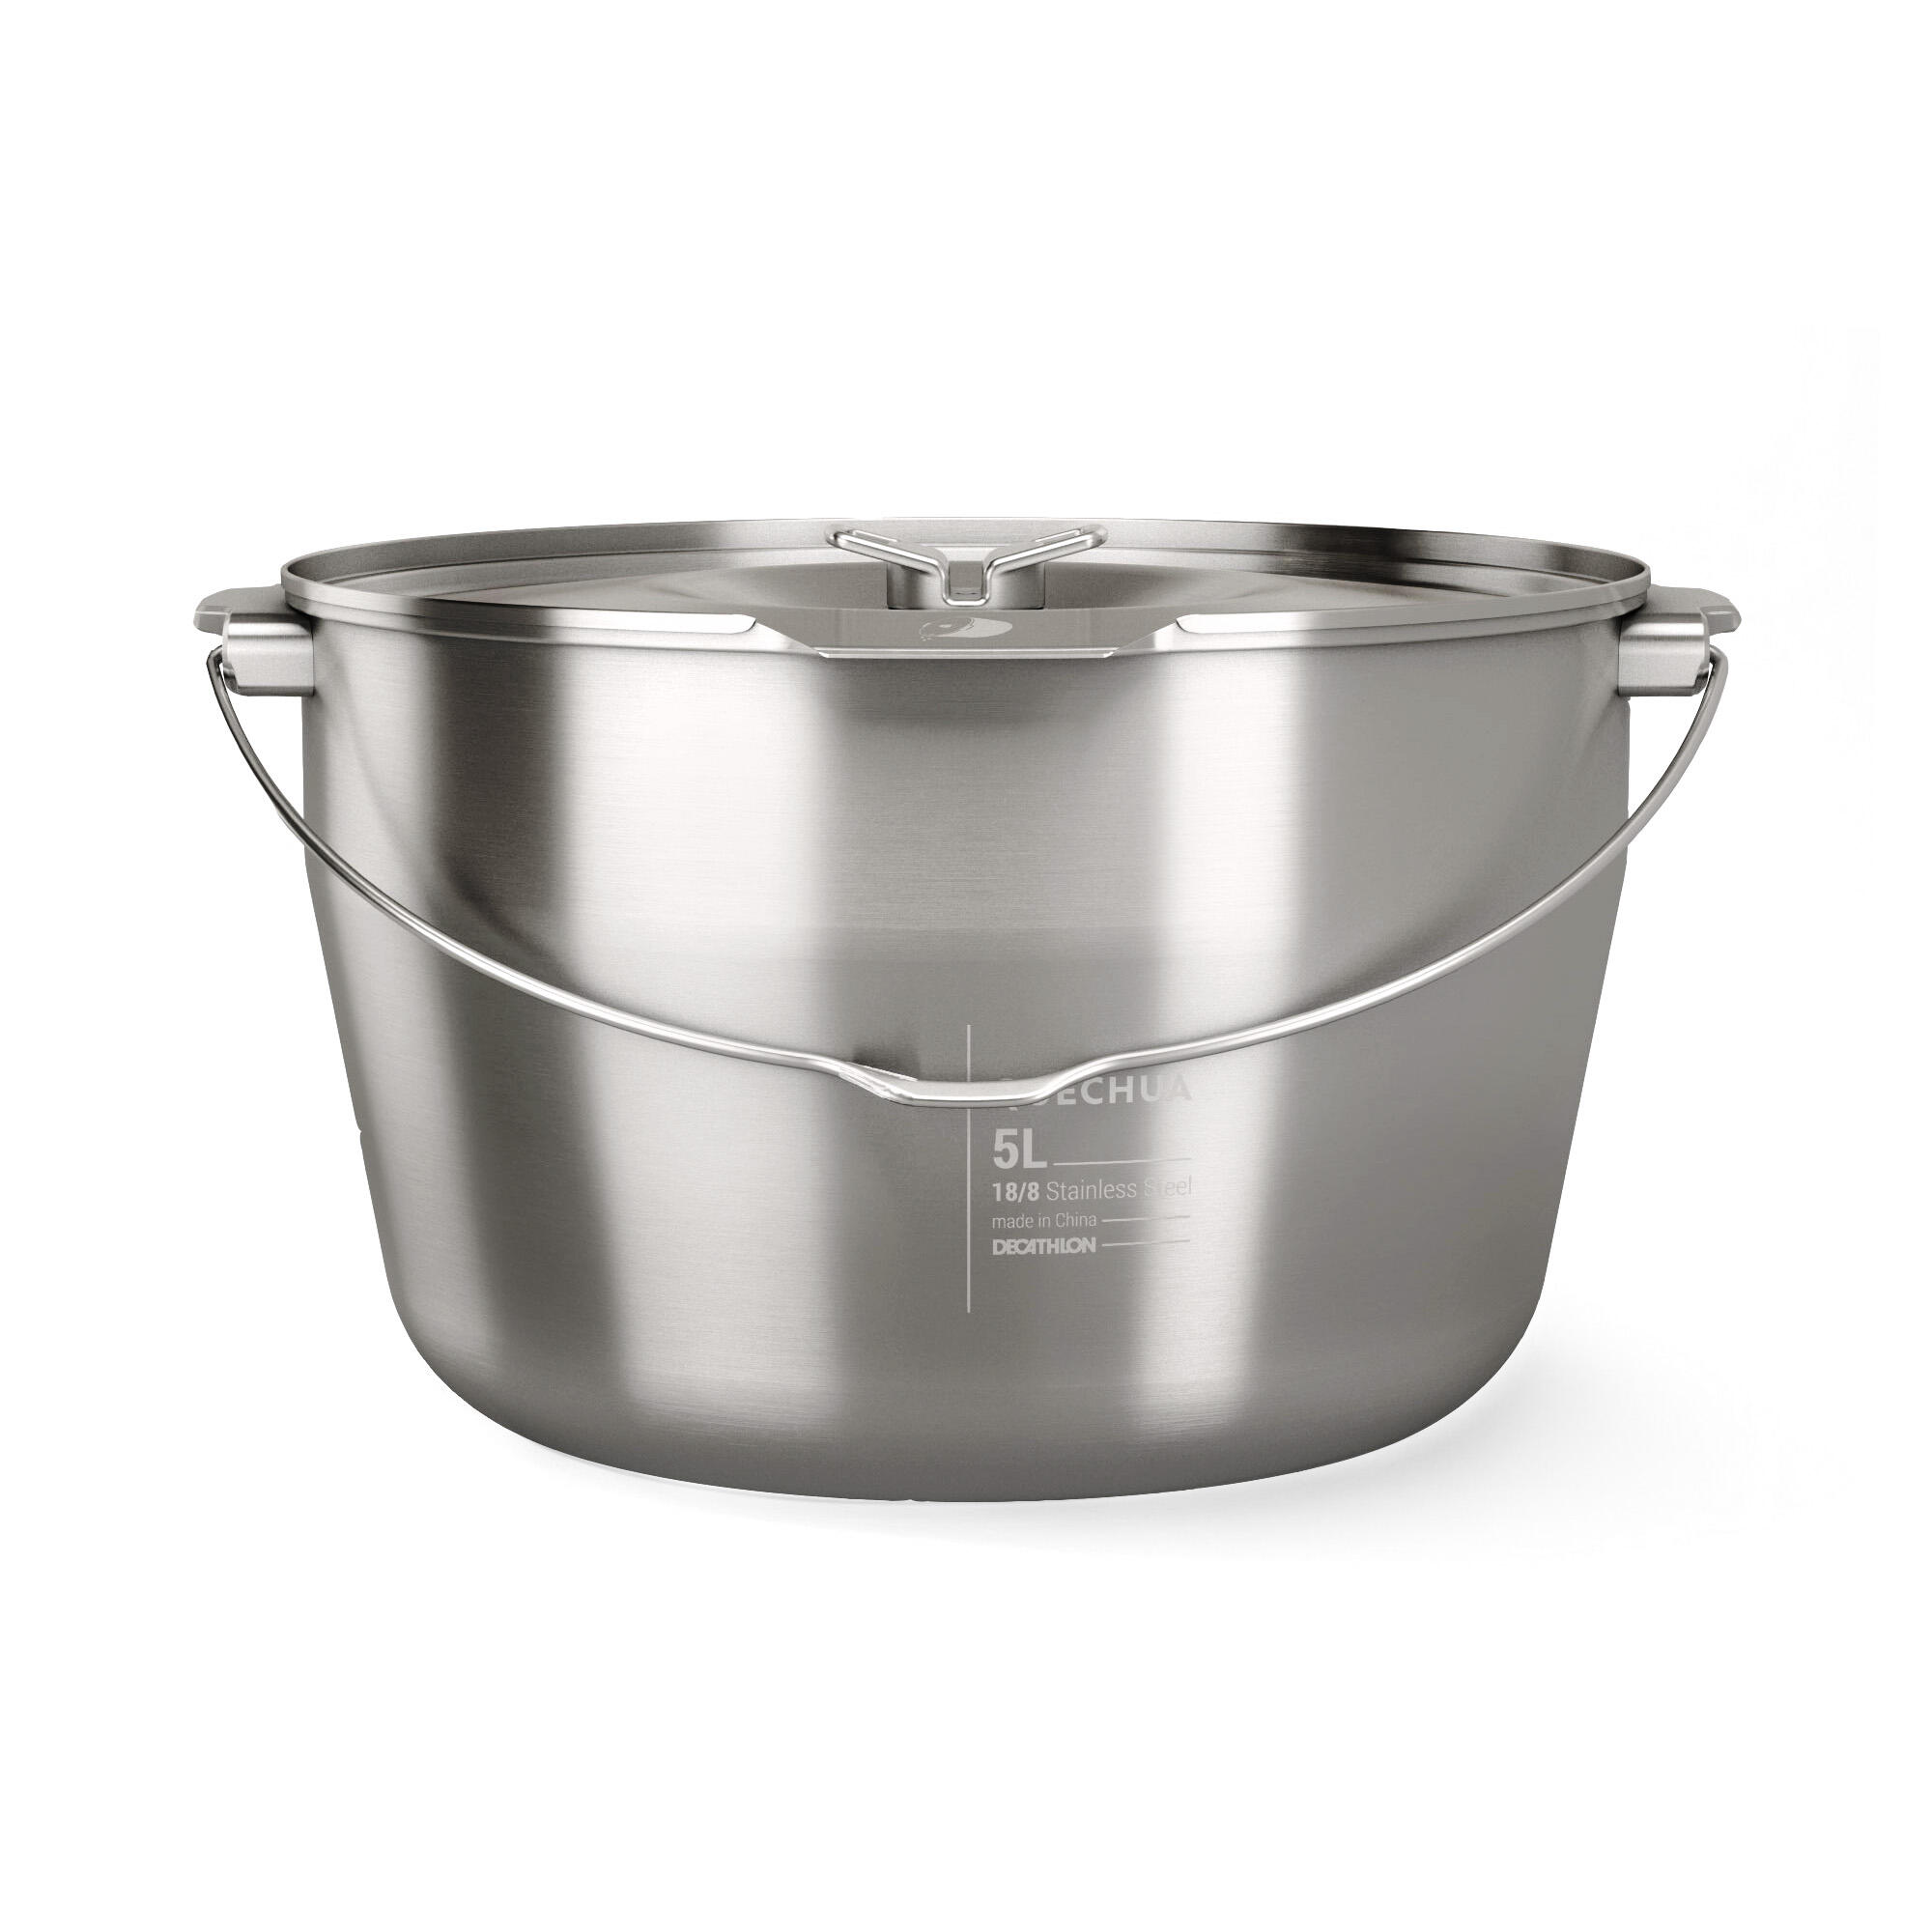 6-People Camping Cooking Pot - Stainless Steel - 5 Litres 7/9